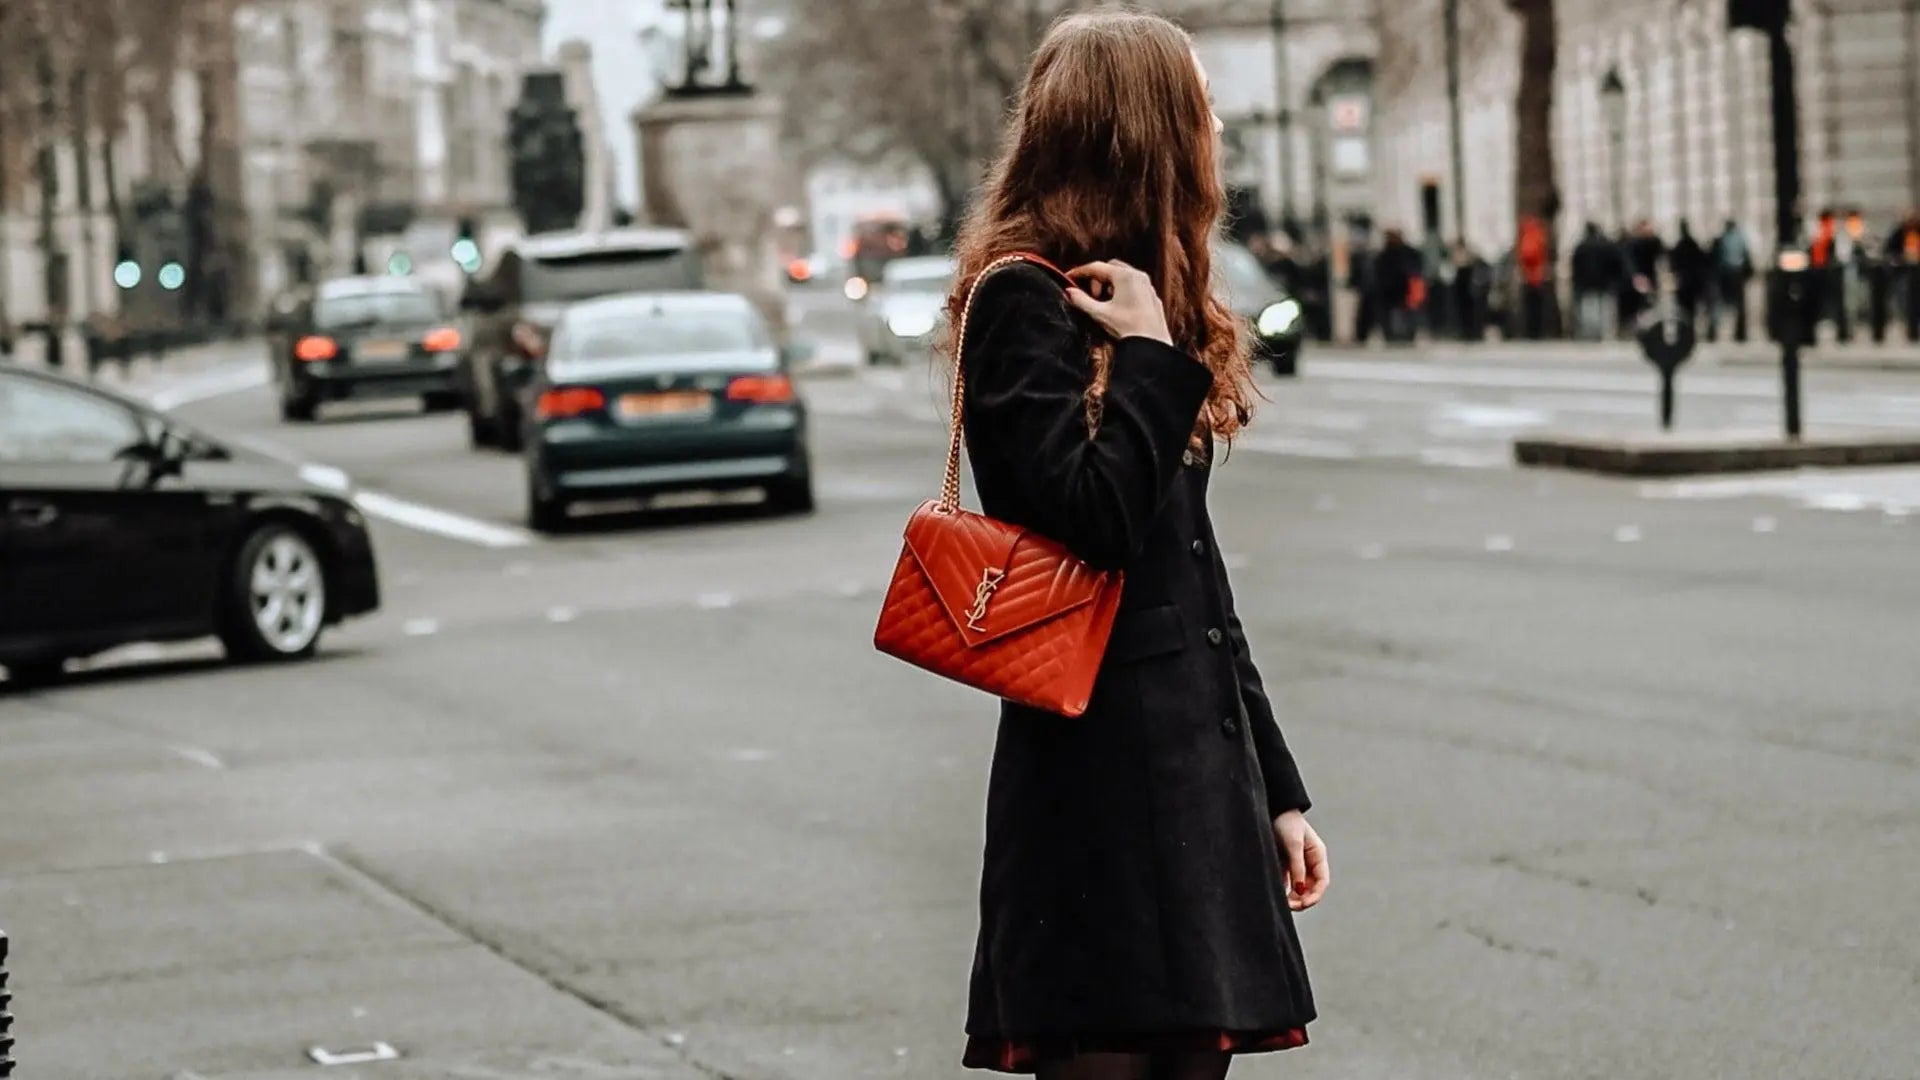 What were the street style trends this latest fashion week in Paris?